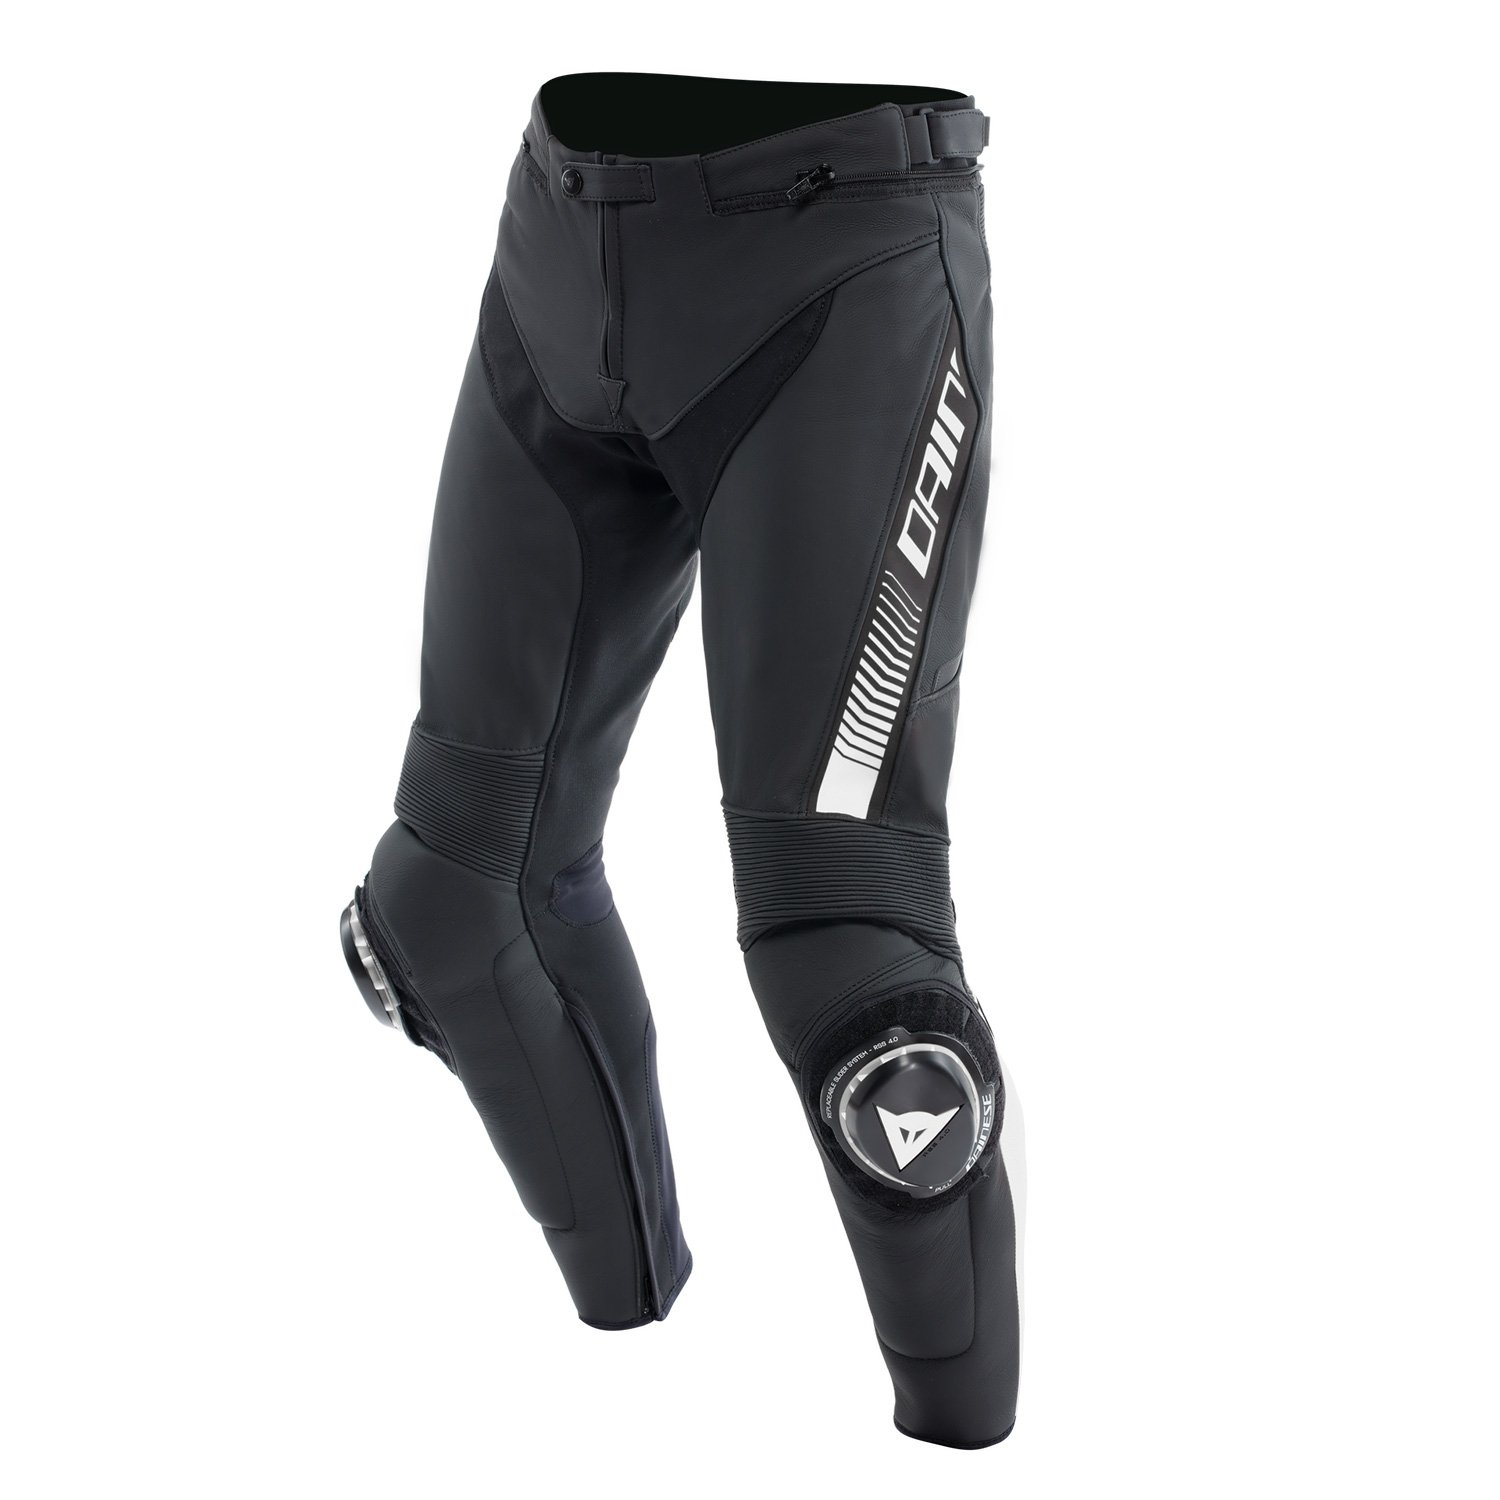 Image of Dainese Super Speed Leather Pants Black White Talla 52